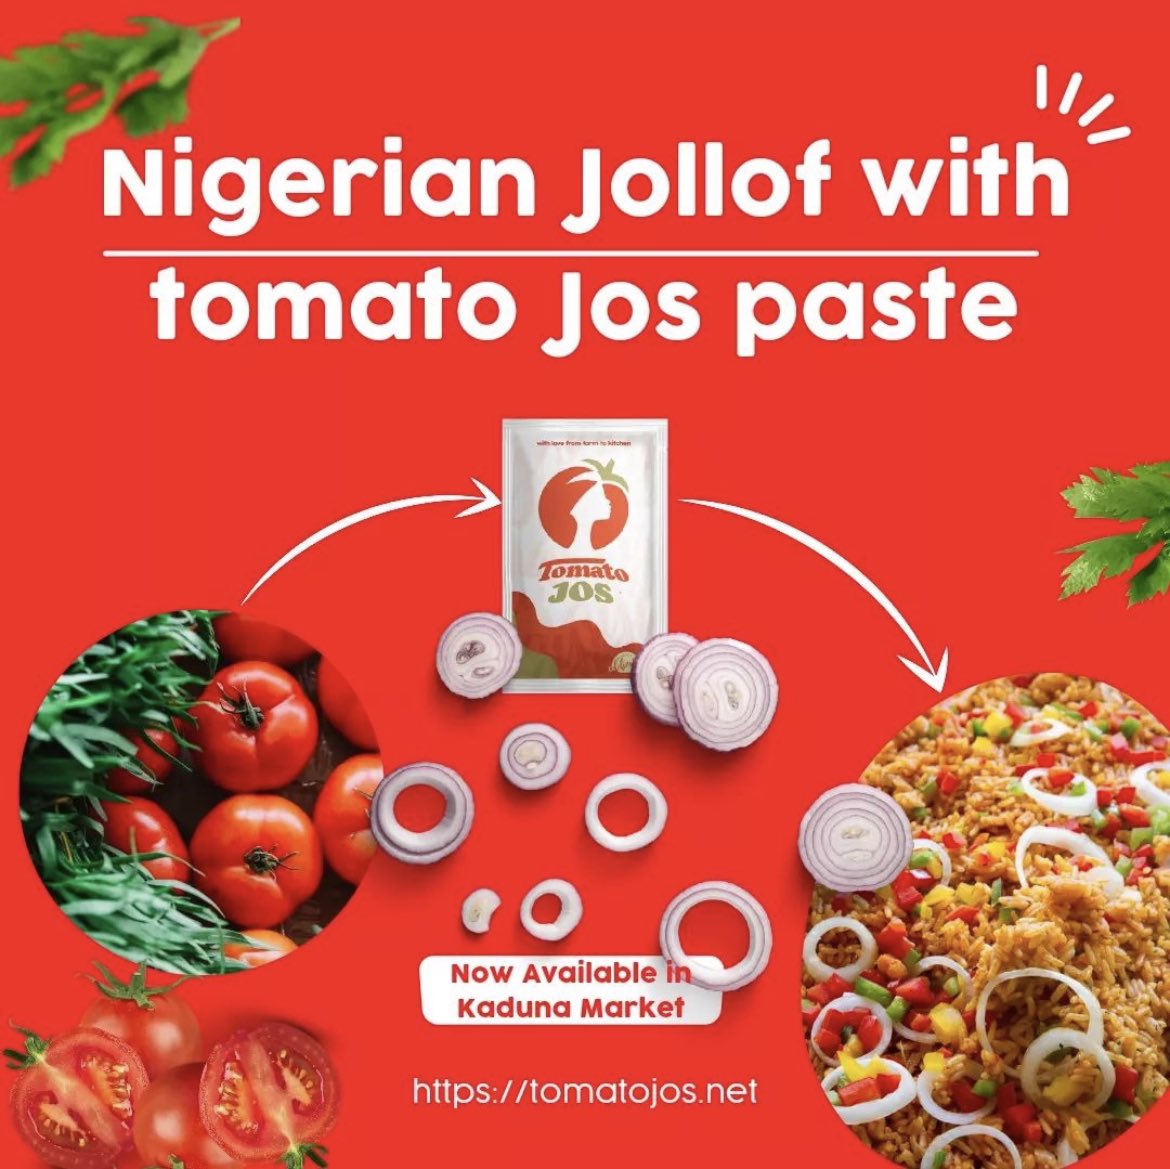 Kaduna woos foreign investors as firm launches tomato paste